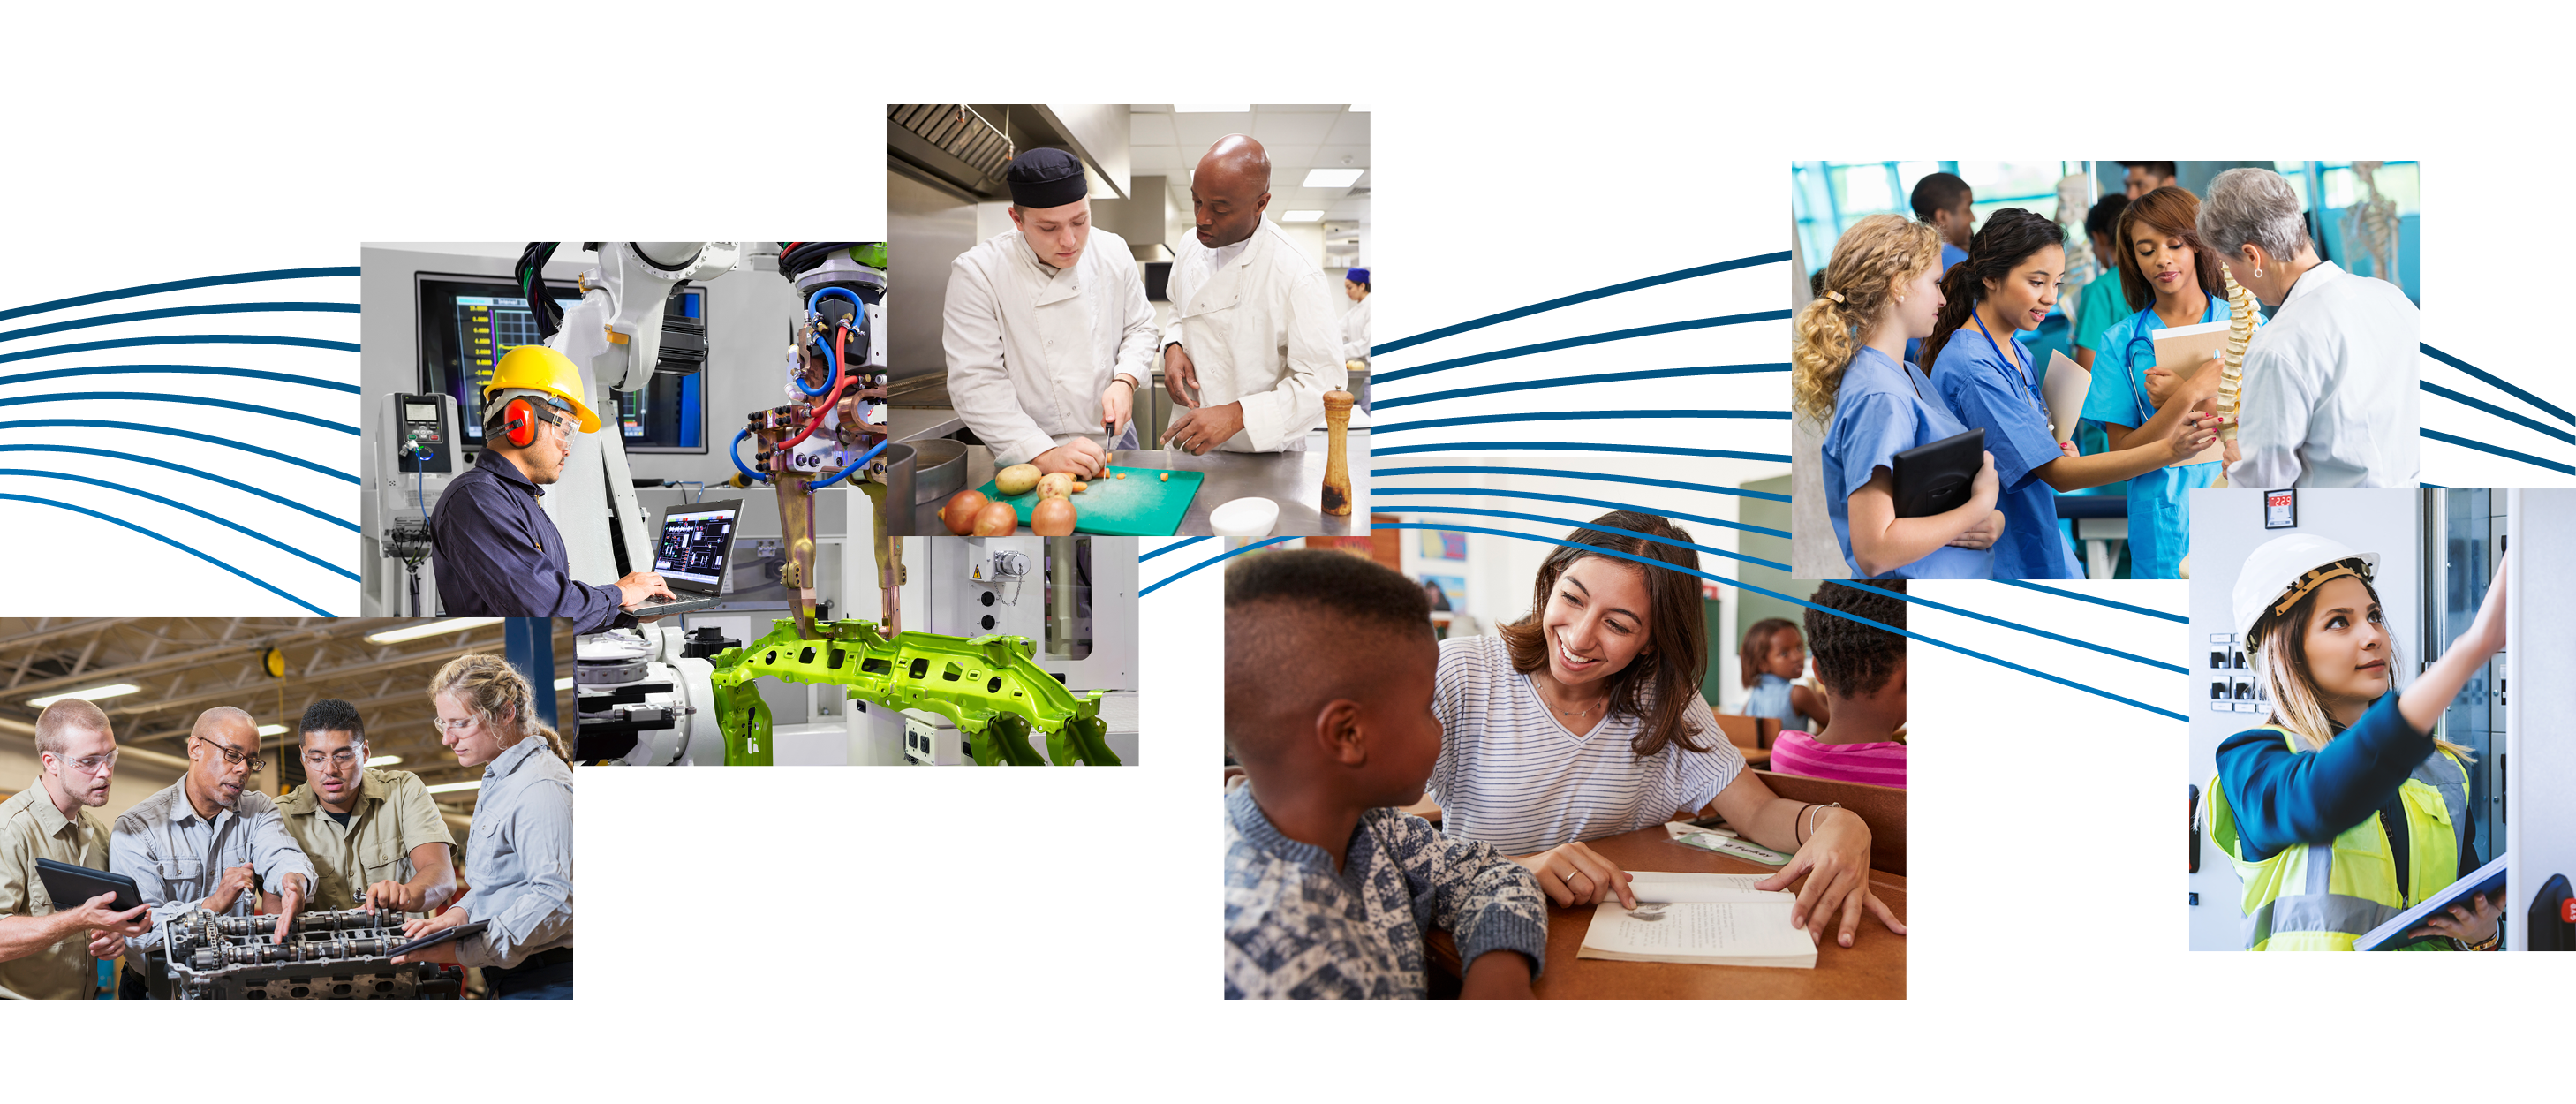 Collage of photos showing various occupations include automotive, healthcare, and culinary arts.